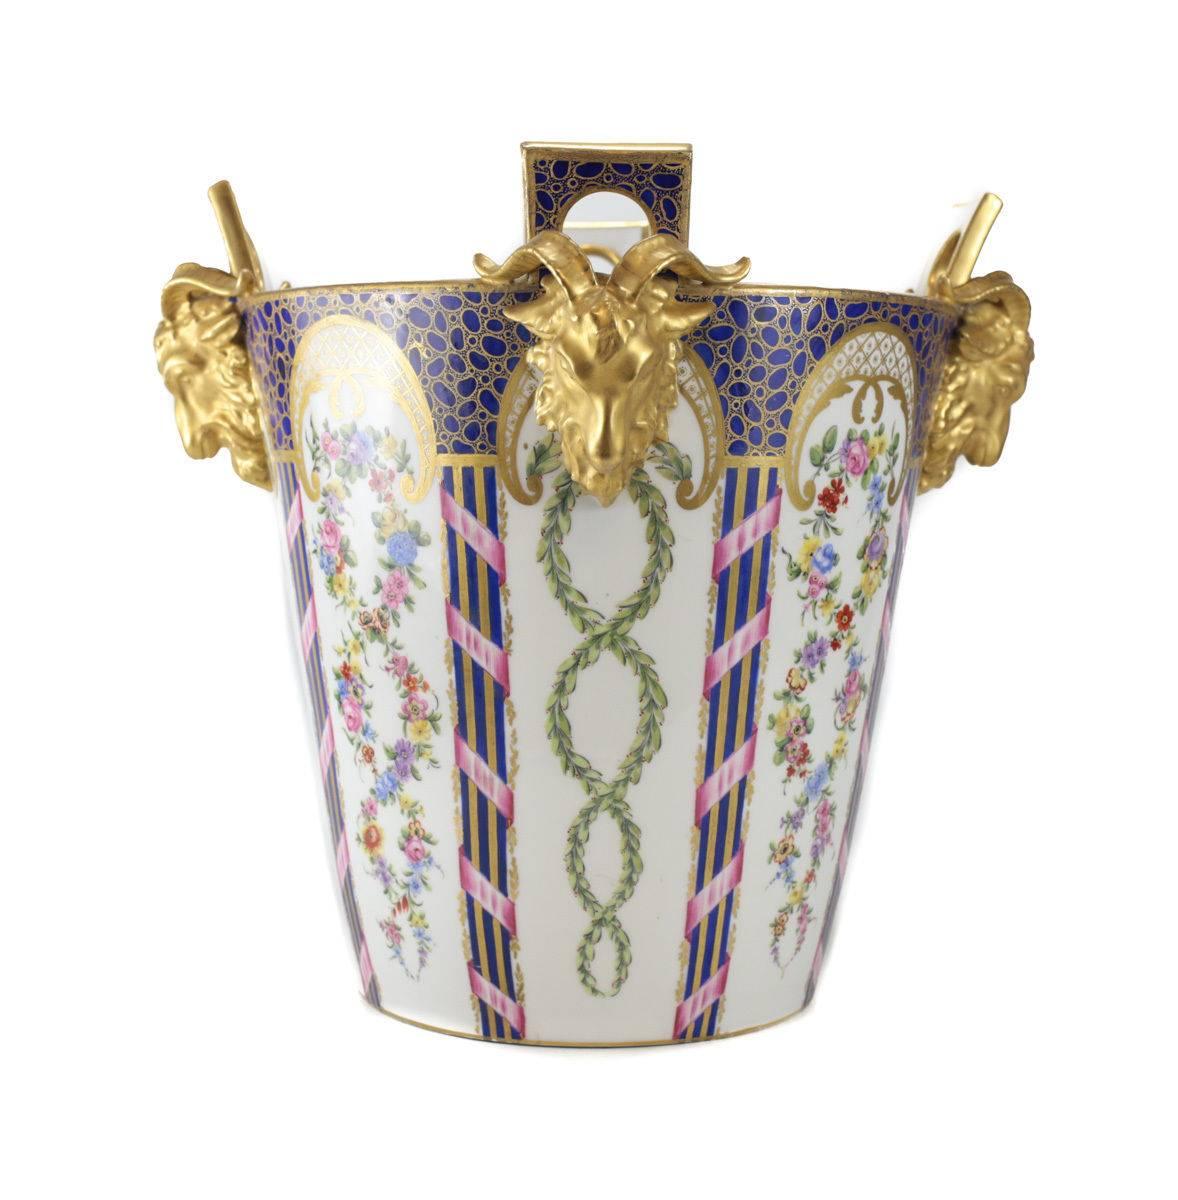 A very large late 19th century Sevres porcelain jardinière cache pot or milk pail, with gilt goat head handles. Finely hand-painted pink roses, green leaf garlands and cobalt blue and gilt designs. Signed with interlaced L's to the underside.